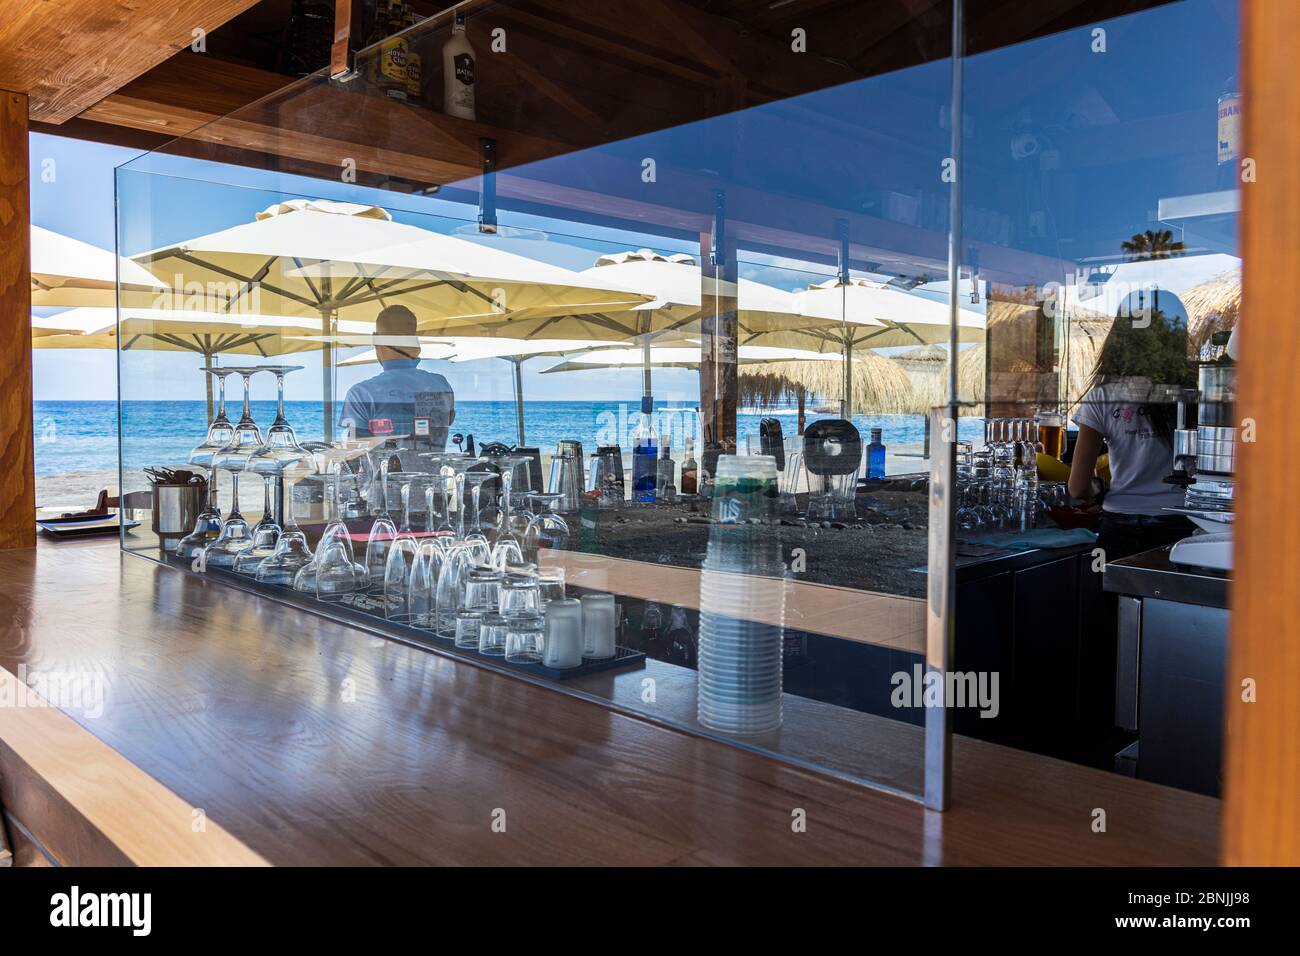 Costa Adeje, Tenerife, Canary Islands, Spain. 15 May 2020. Preparing the Coqueluche beach bar, kiosk to open with limited facilities on Playa Enramada, La Caleta. New glass screens on the bar to protect staff and customers. Part of the de-escalation of the Covid 19, Coronavirus lockdown restrictions. Stock Photo